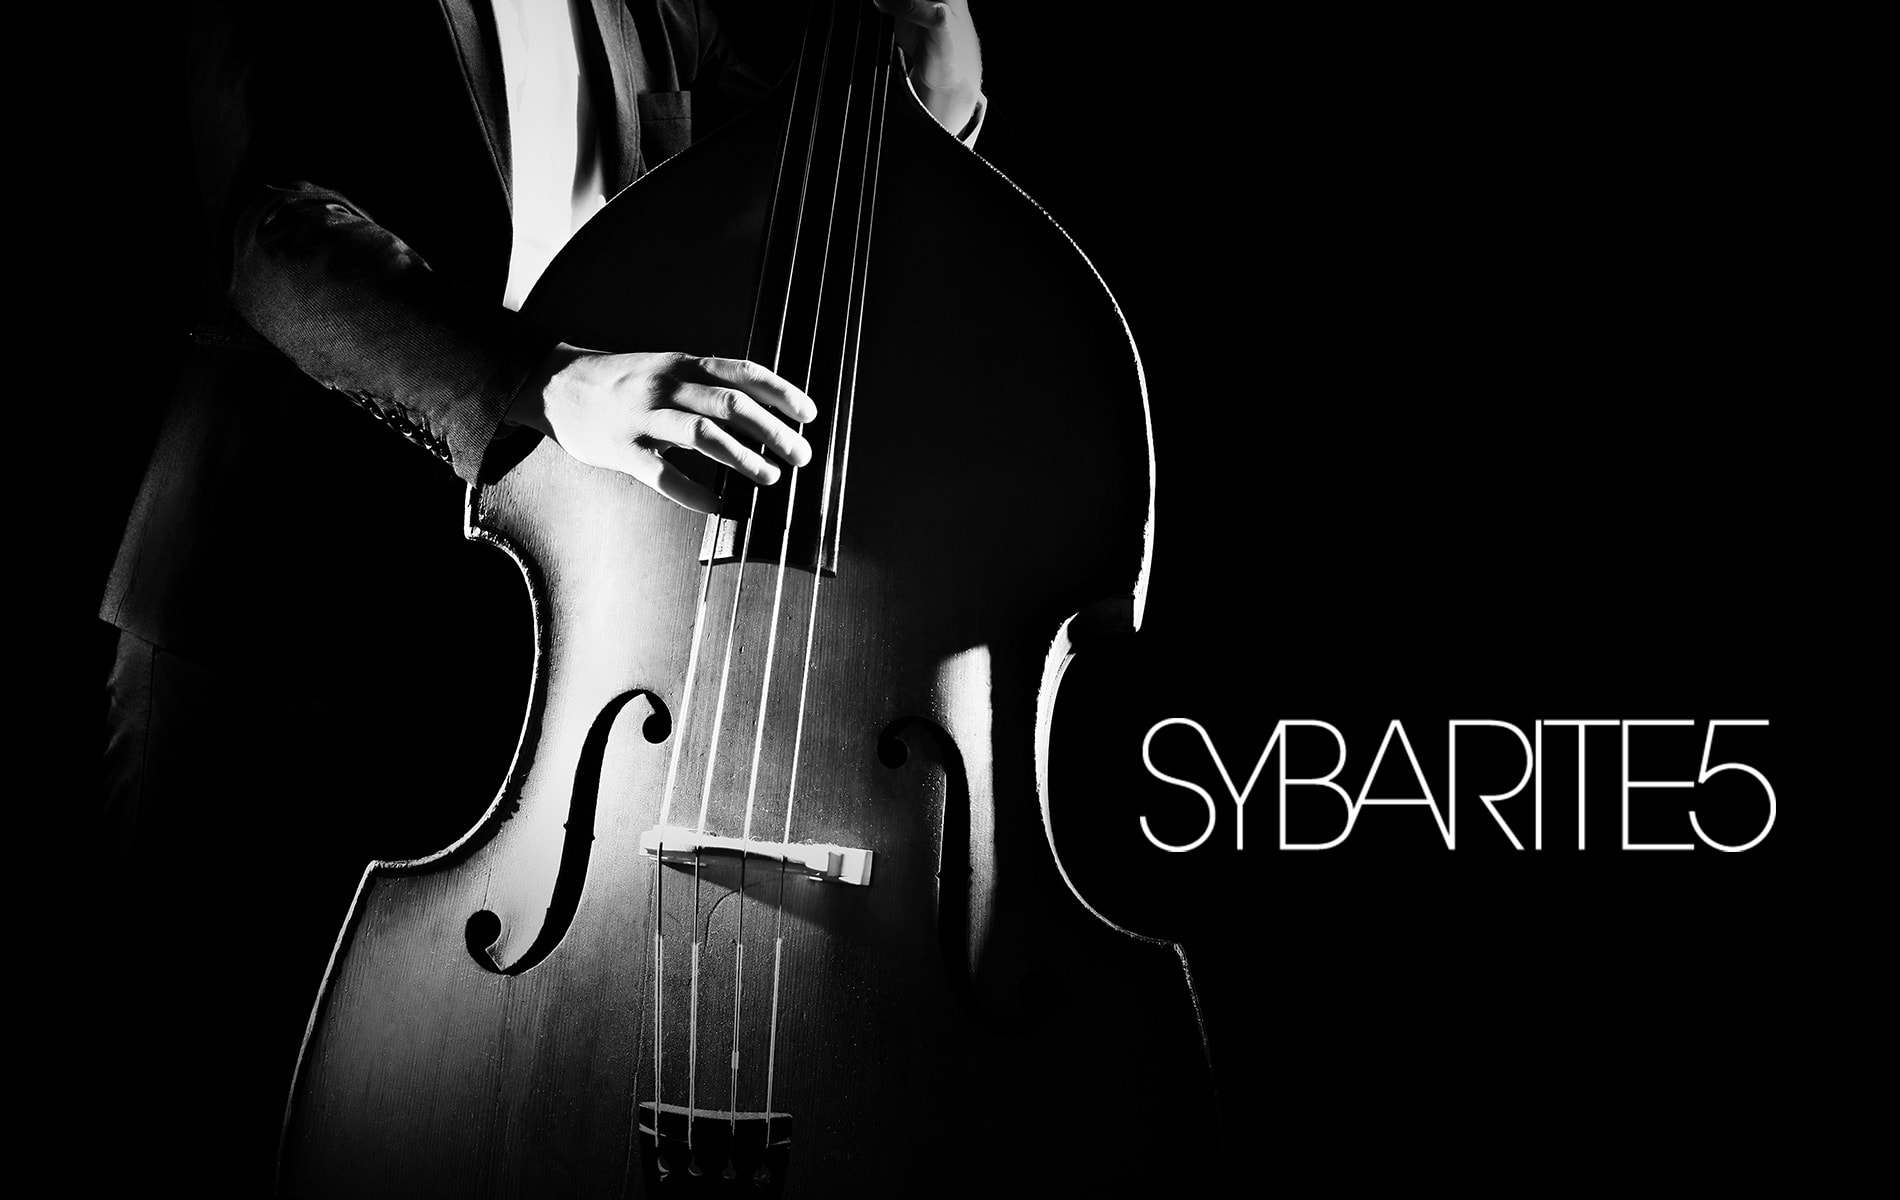 Experience Classical Music with a Twist at Sinfonia Presents SYBARITE5